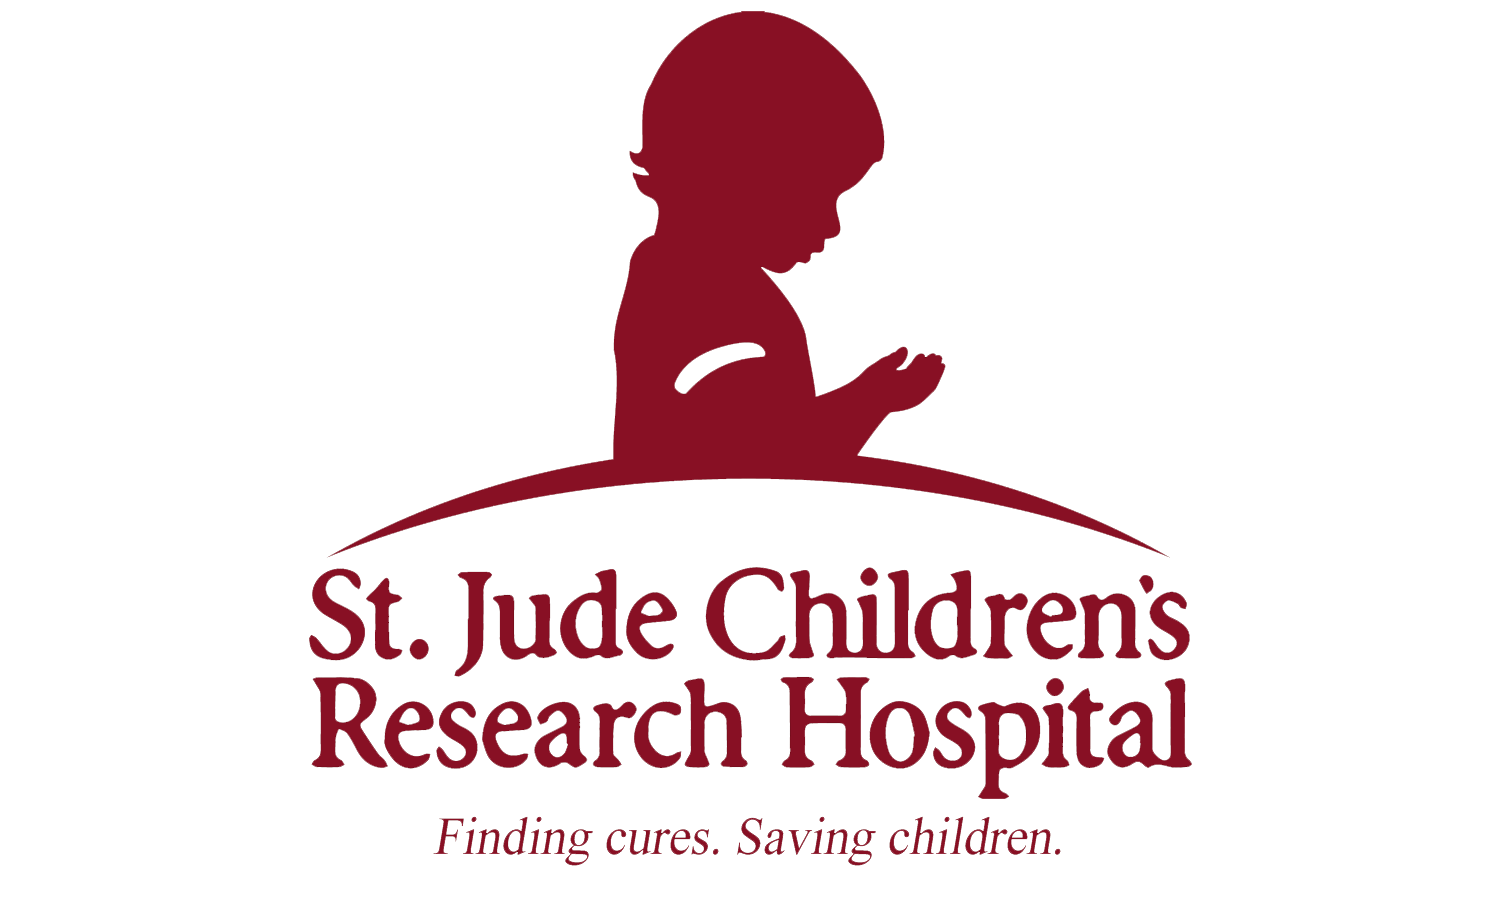 St. Jude's Research Hospital